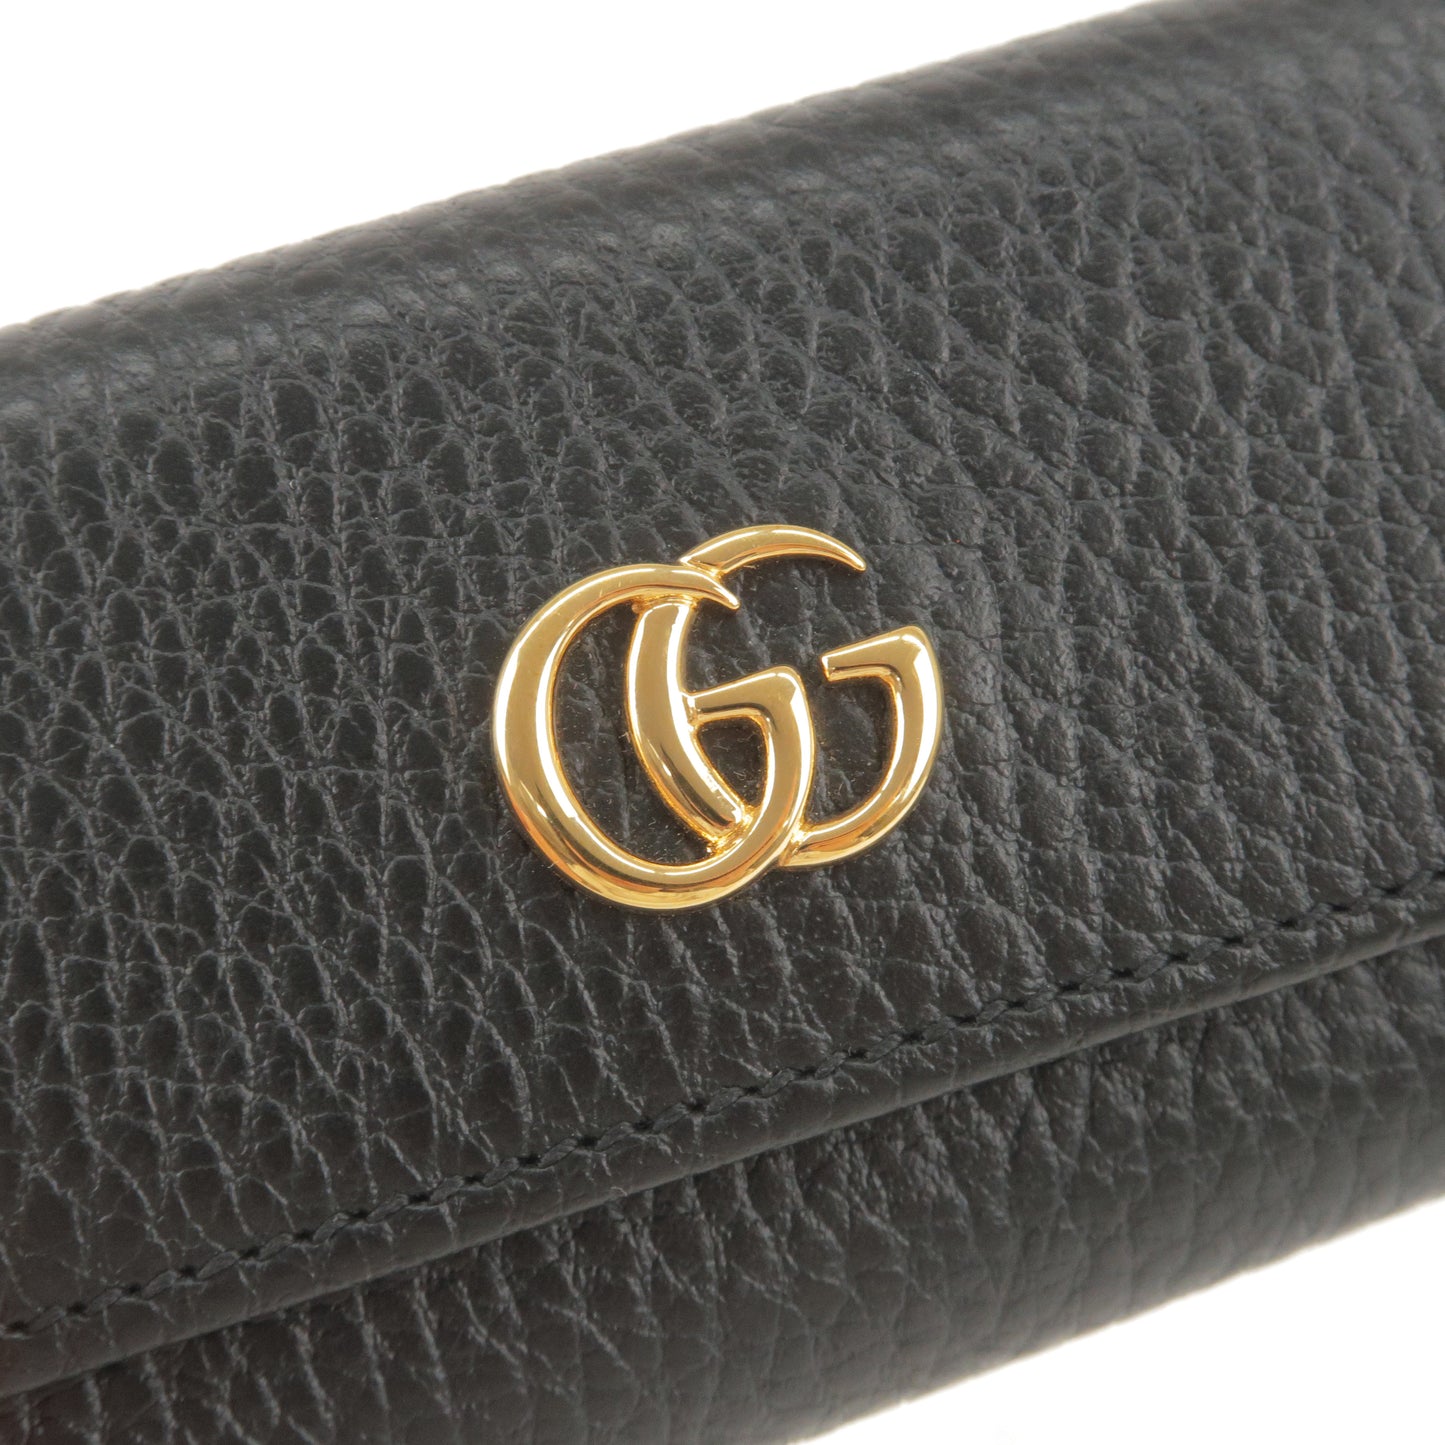 GUCCI GG Marmont Leather 6 Rings Key Case Key Holder Black 456118